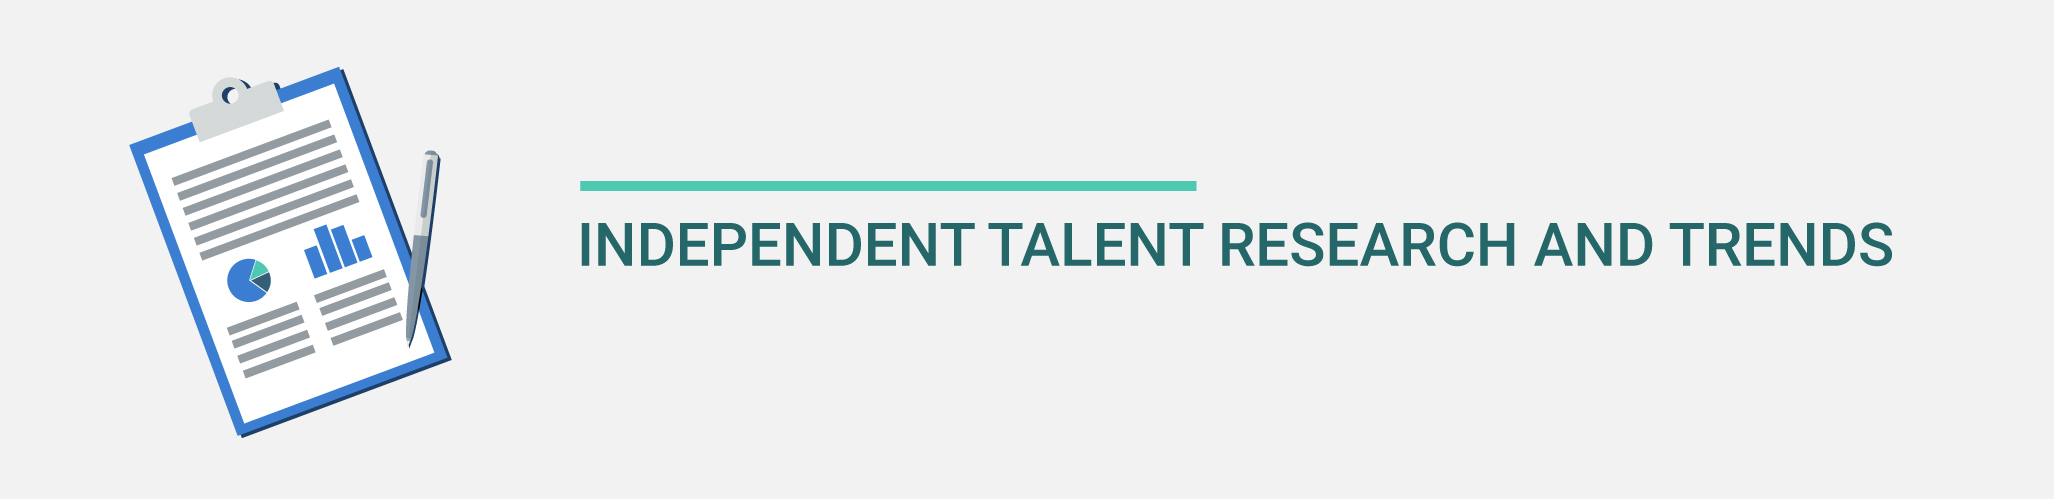 Icon of Clipboard with Charts and "Independent Talent Research and Trends" text